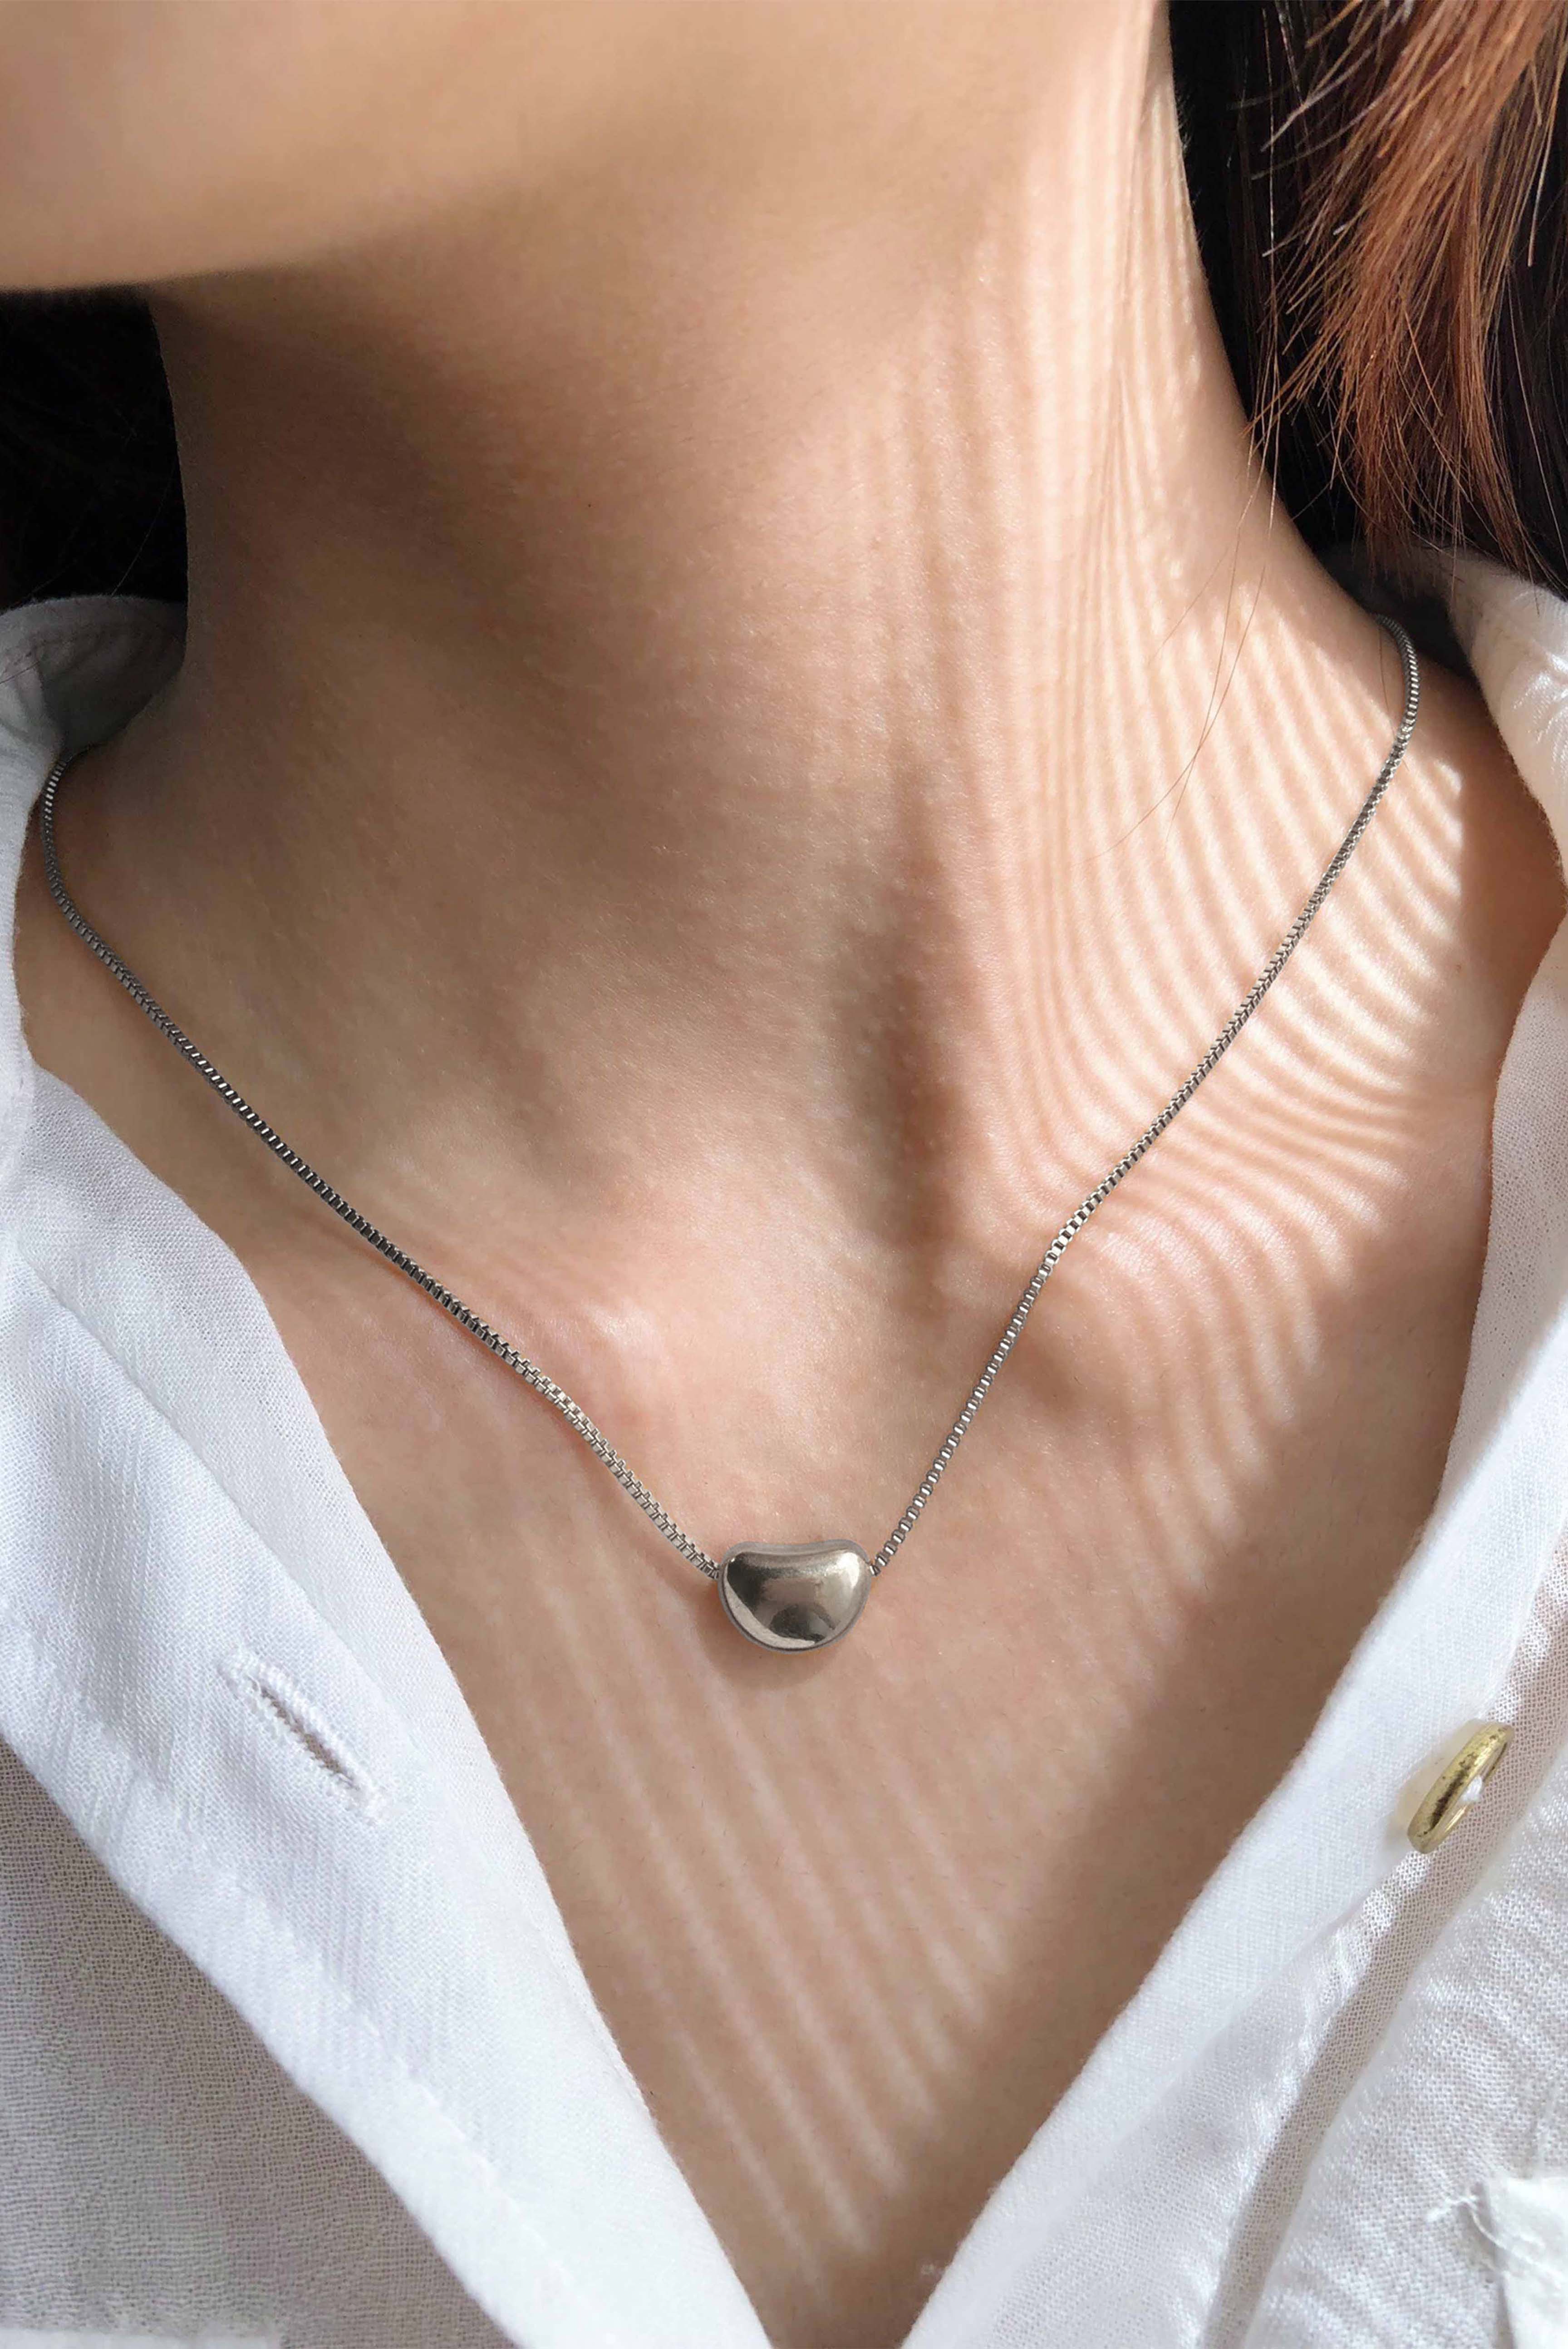 BEANS SILVER (NECKLACE)